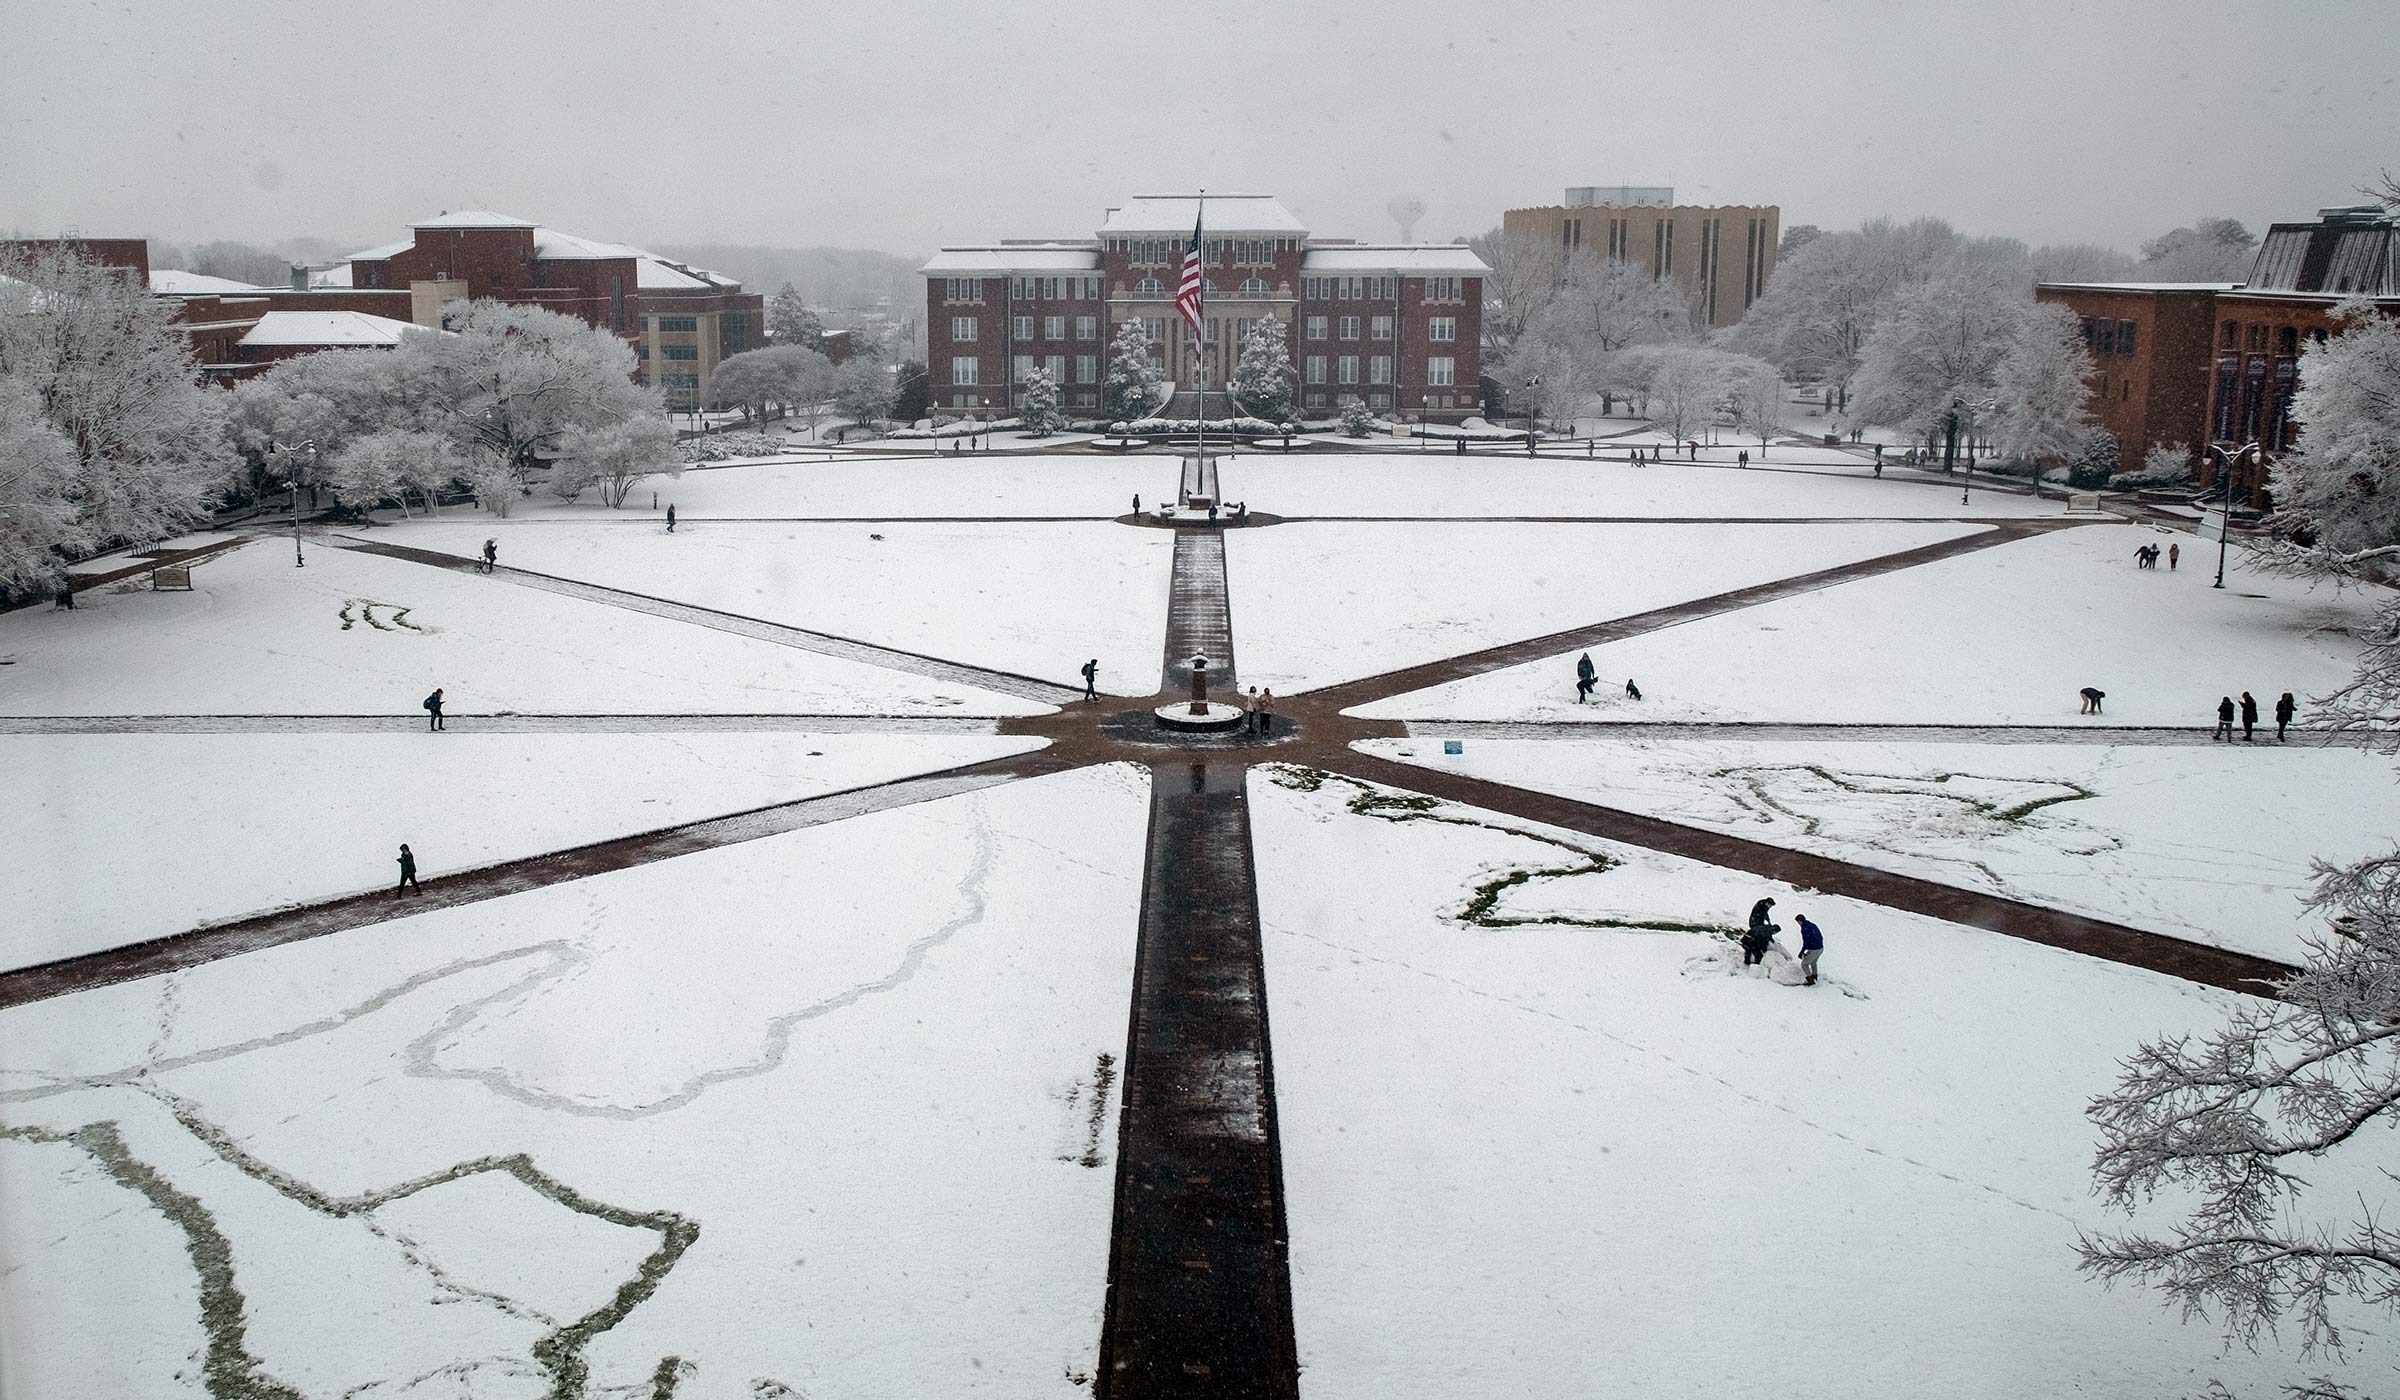 View looking down on a snow-covered Drill Field with students walking and making snowmen.